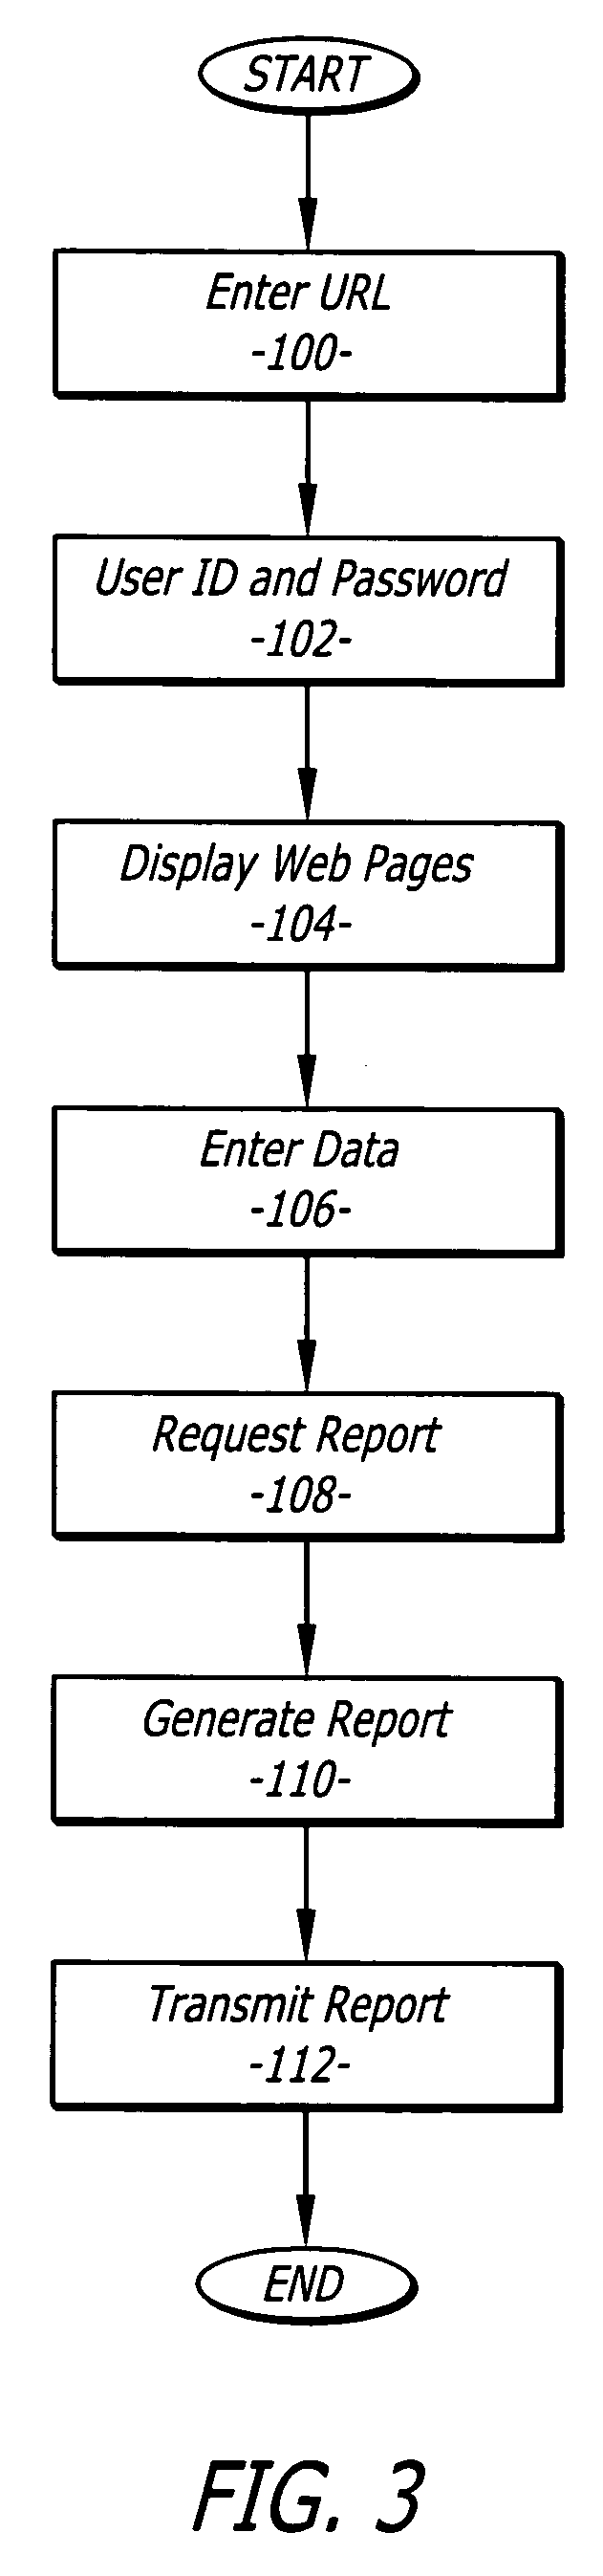 System and method for processing work products for vehicles via the world wide web